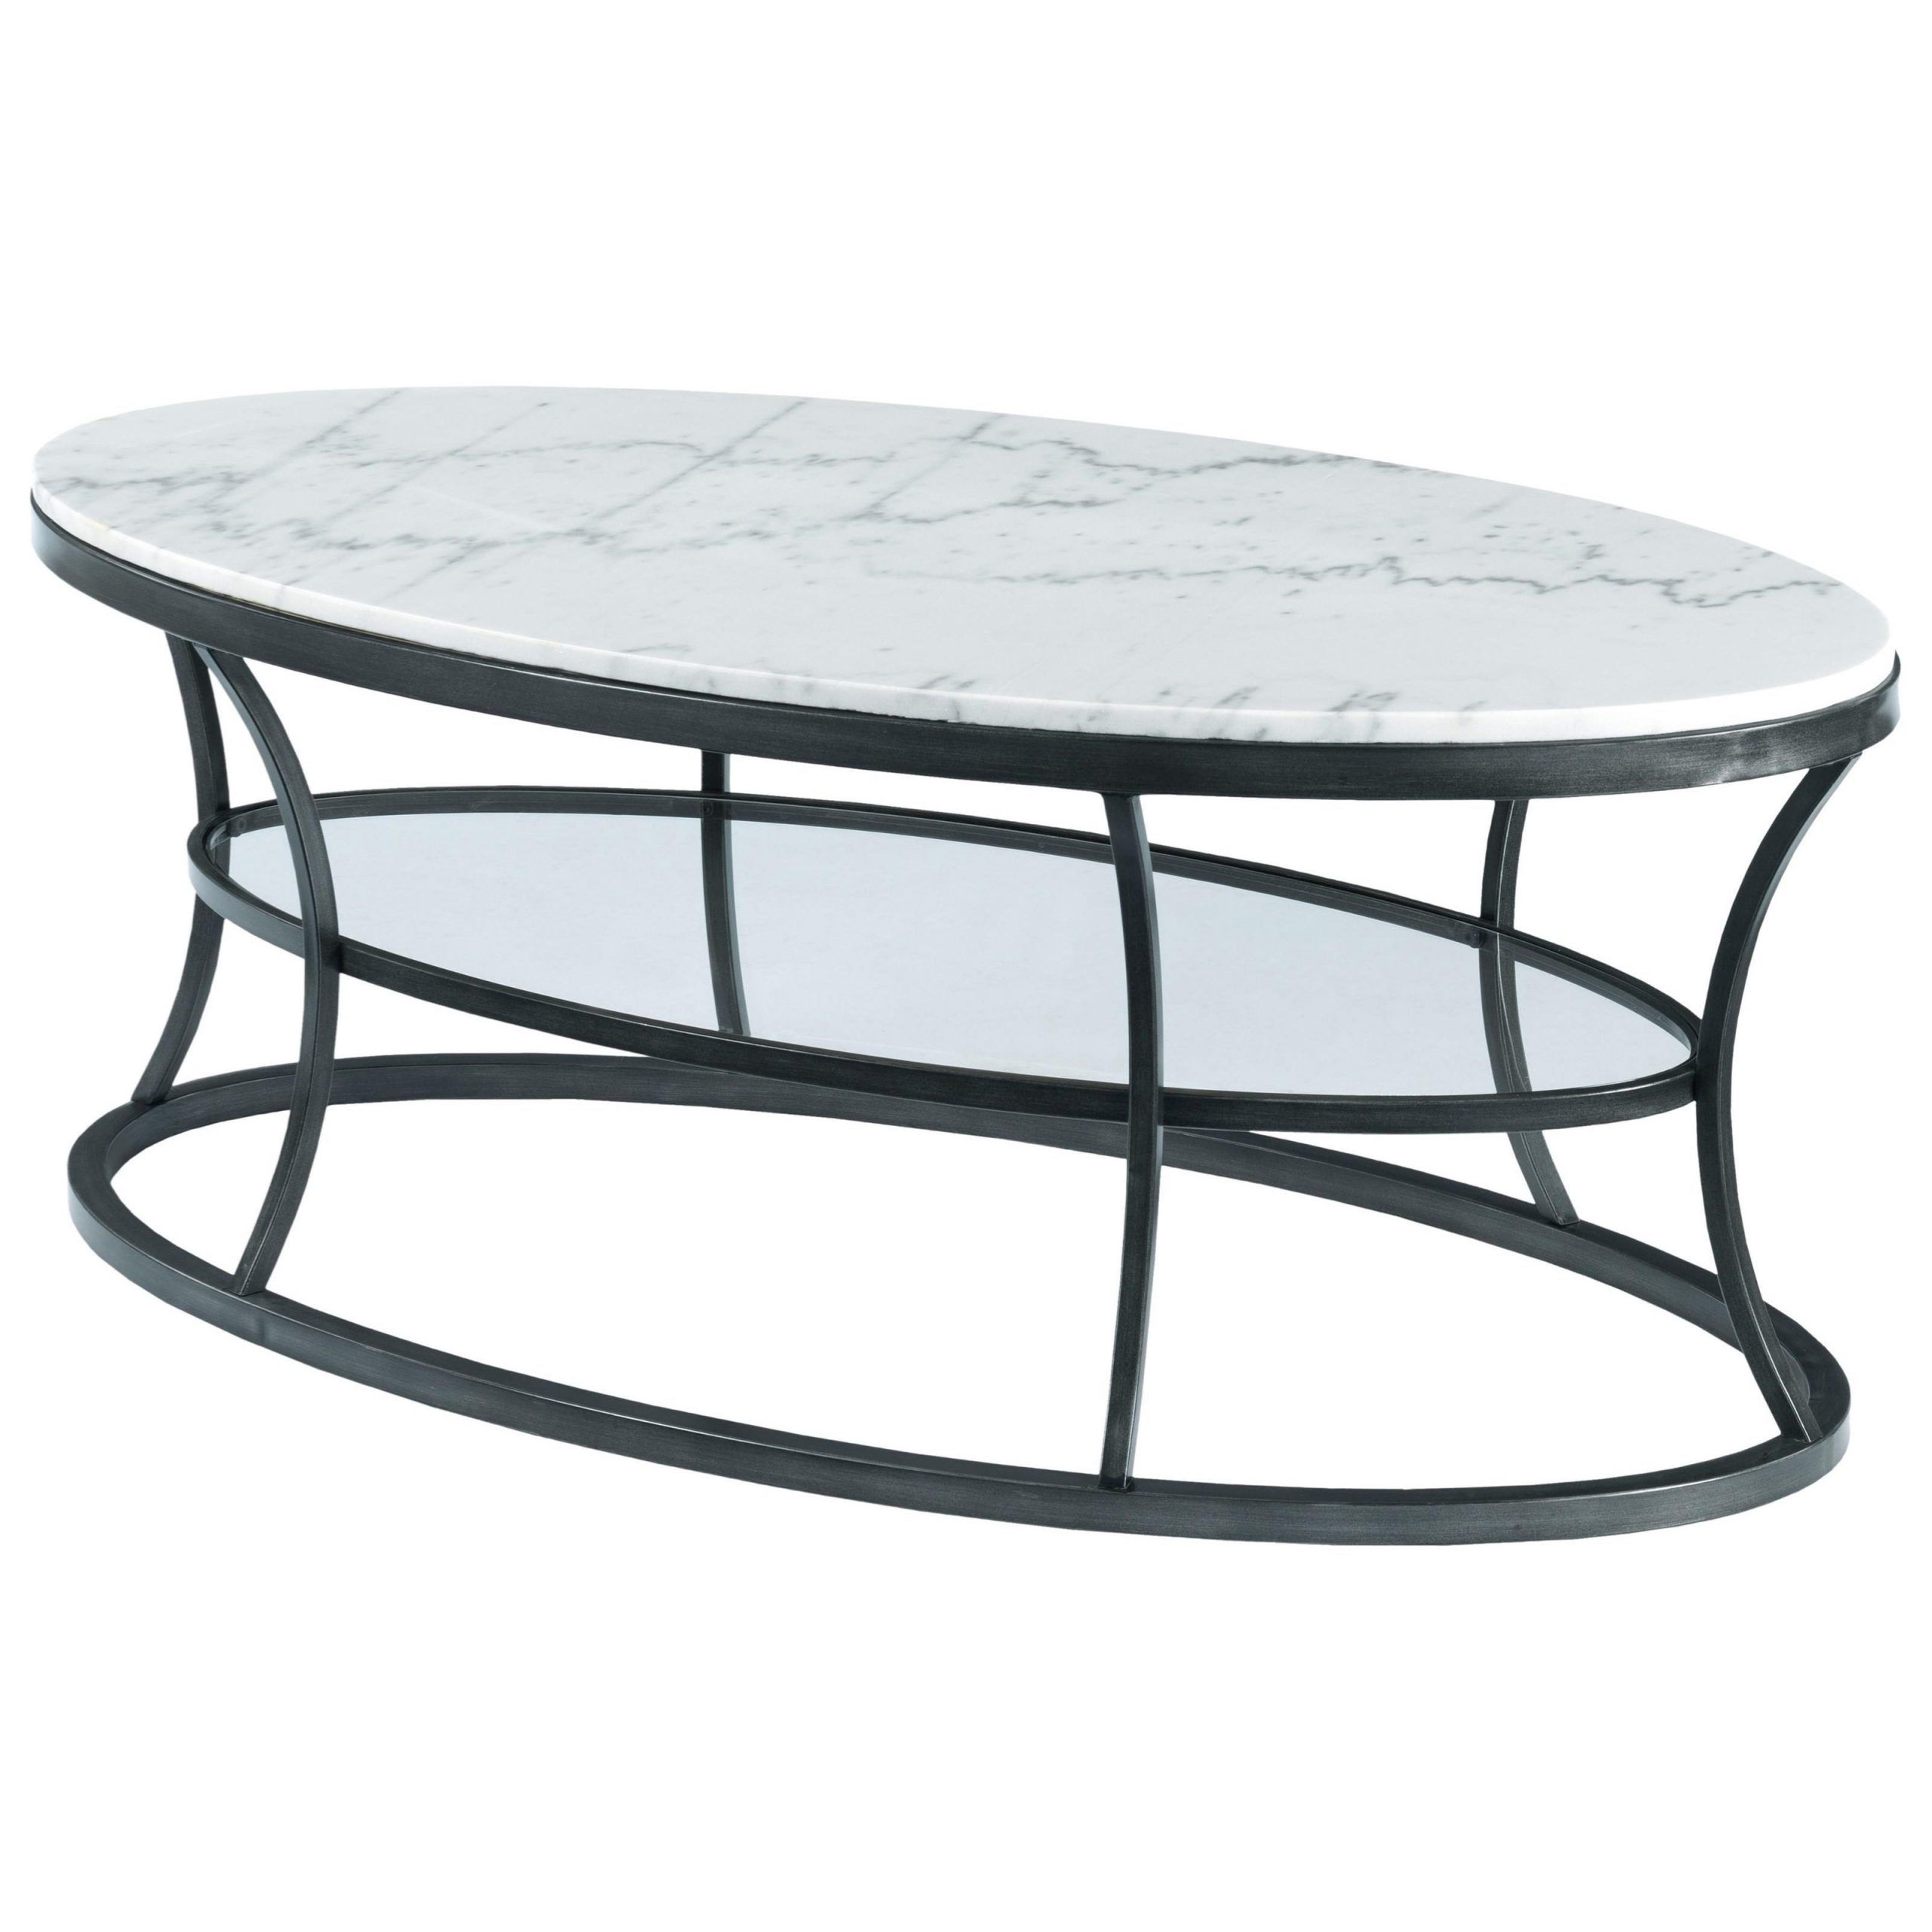 Hammary Impact Oval Cocktail Table With Marble Top And Pertaining To Trendy Glass And Gold Oval Coffee Tables (View 5 of 20)